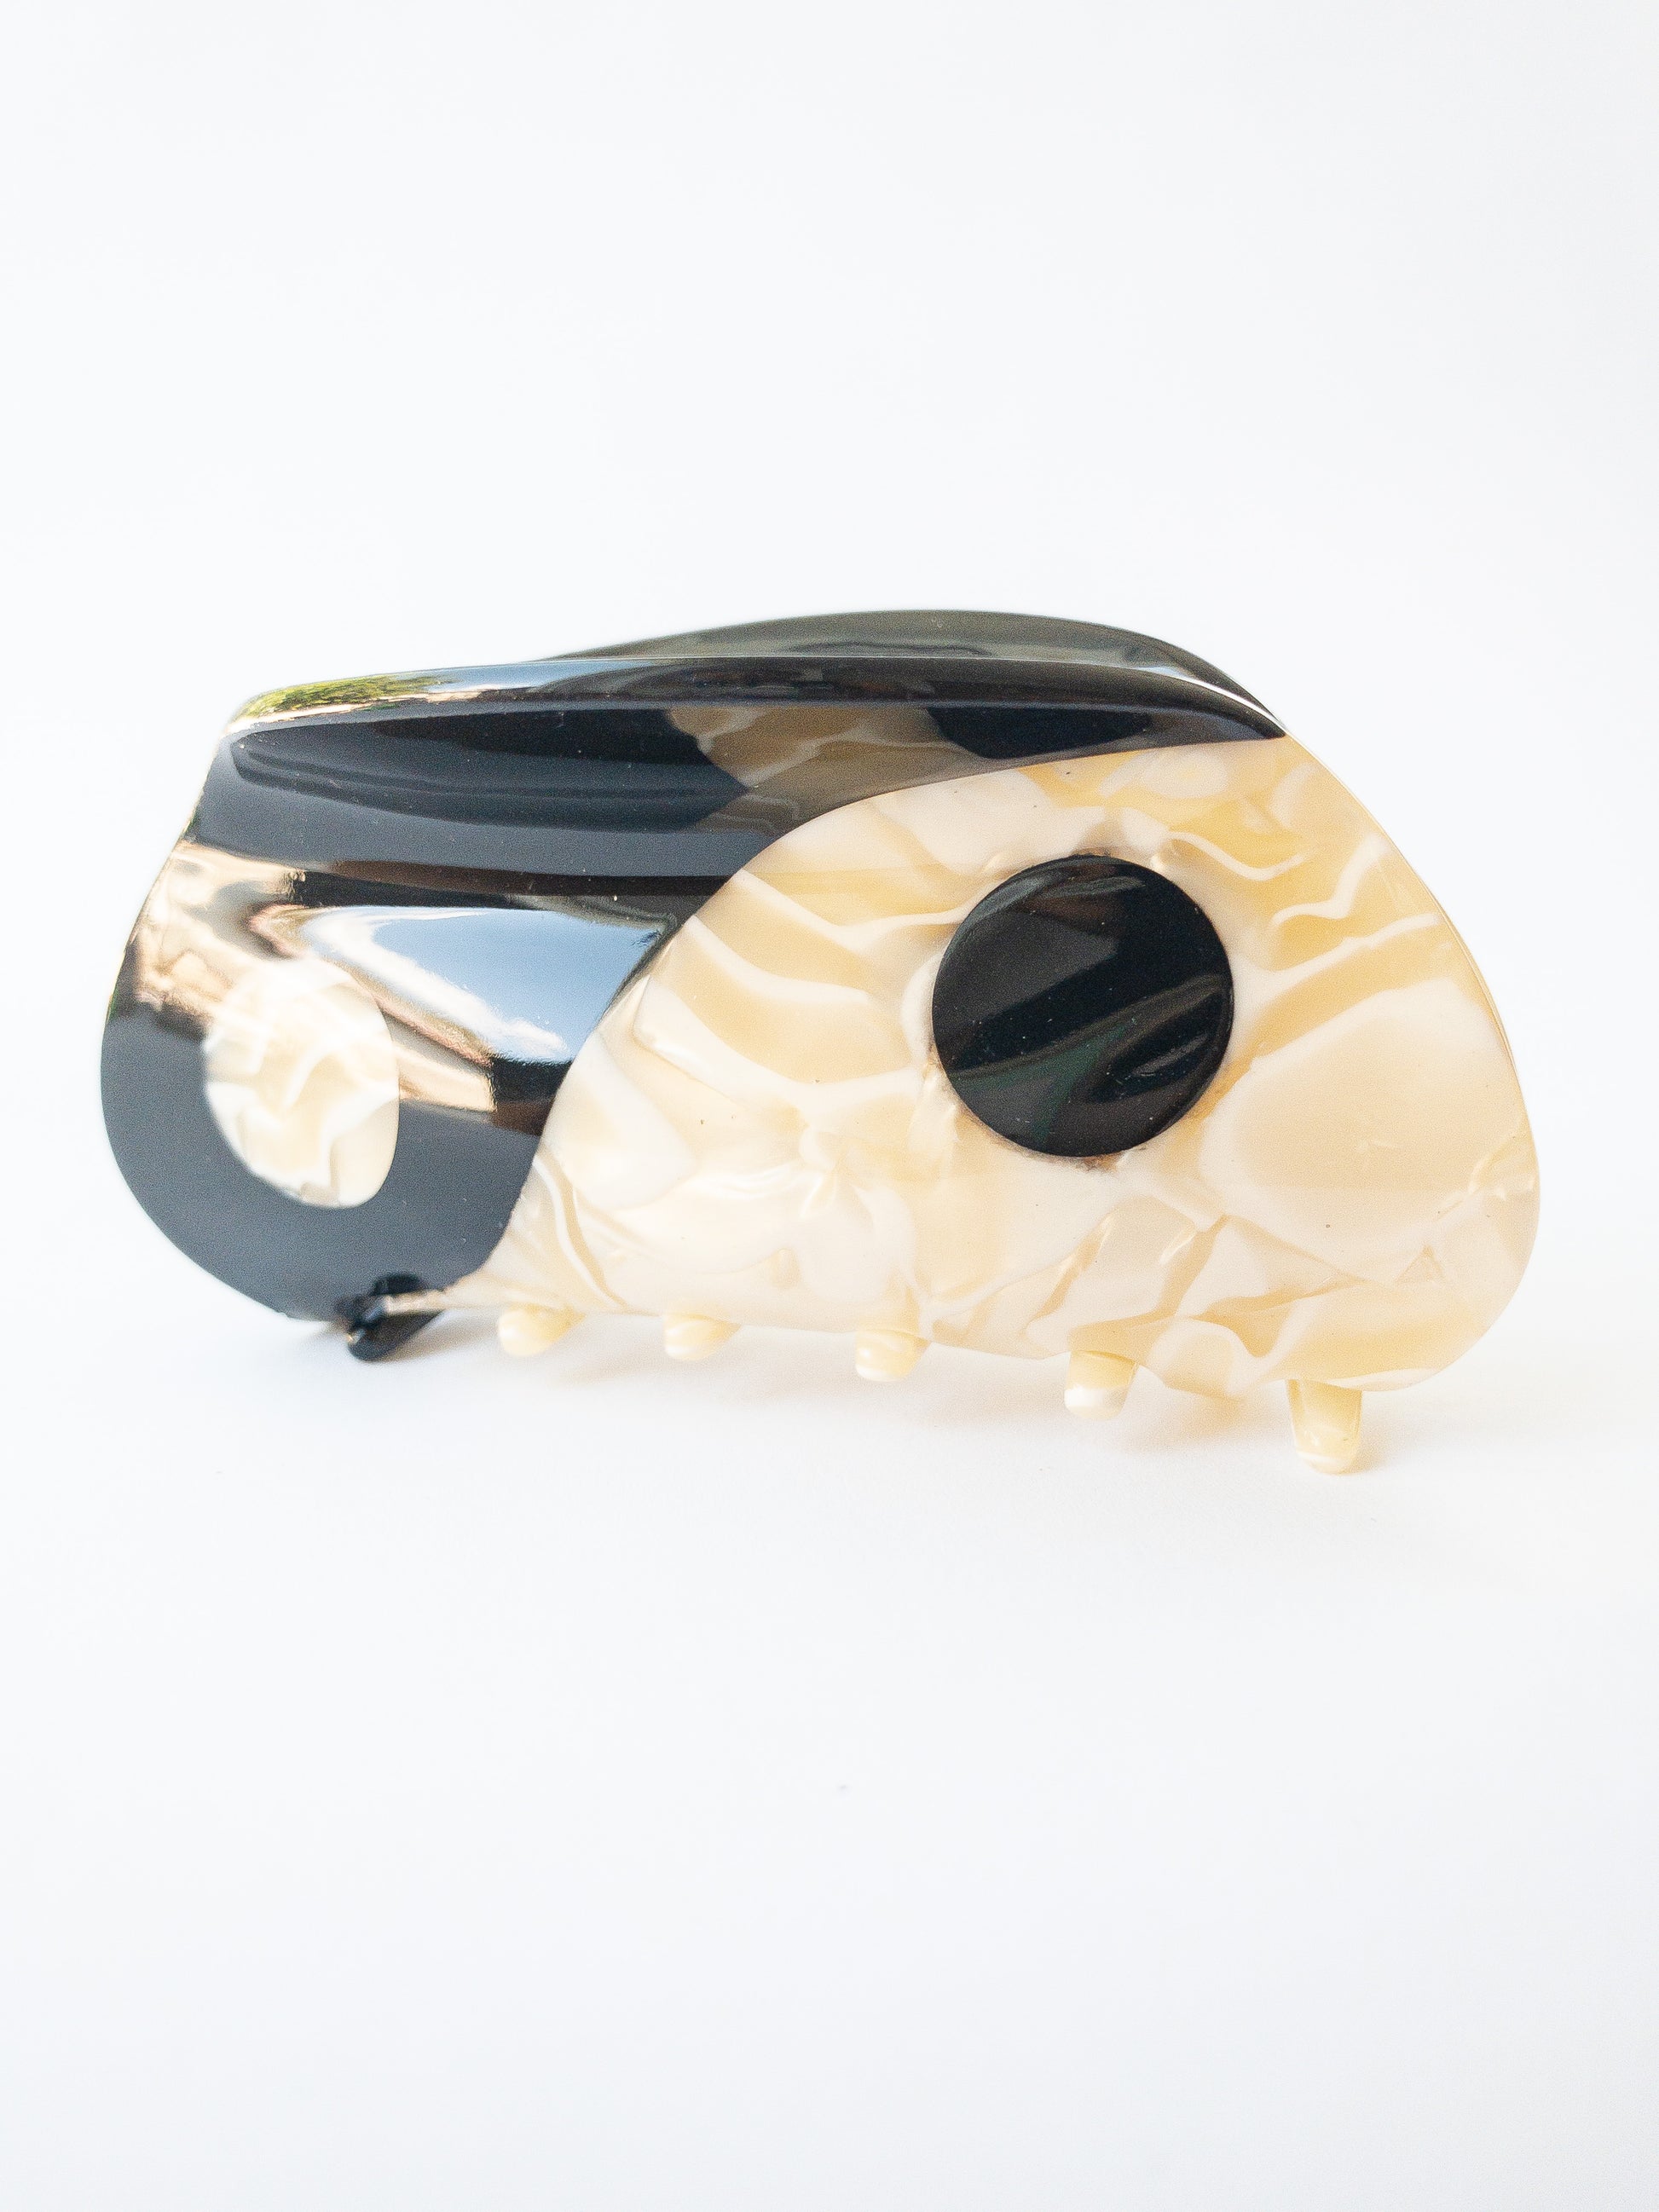 Large yin yang hair claw clip in a beautiful swirl of cream white and midnight black colors. This claw is shiny and strong, a great everyday staple.